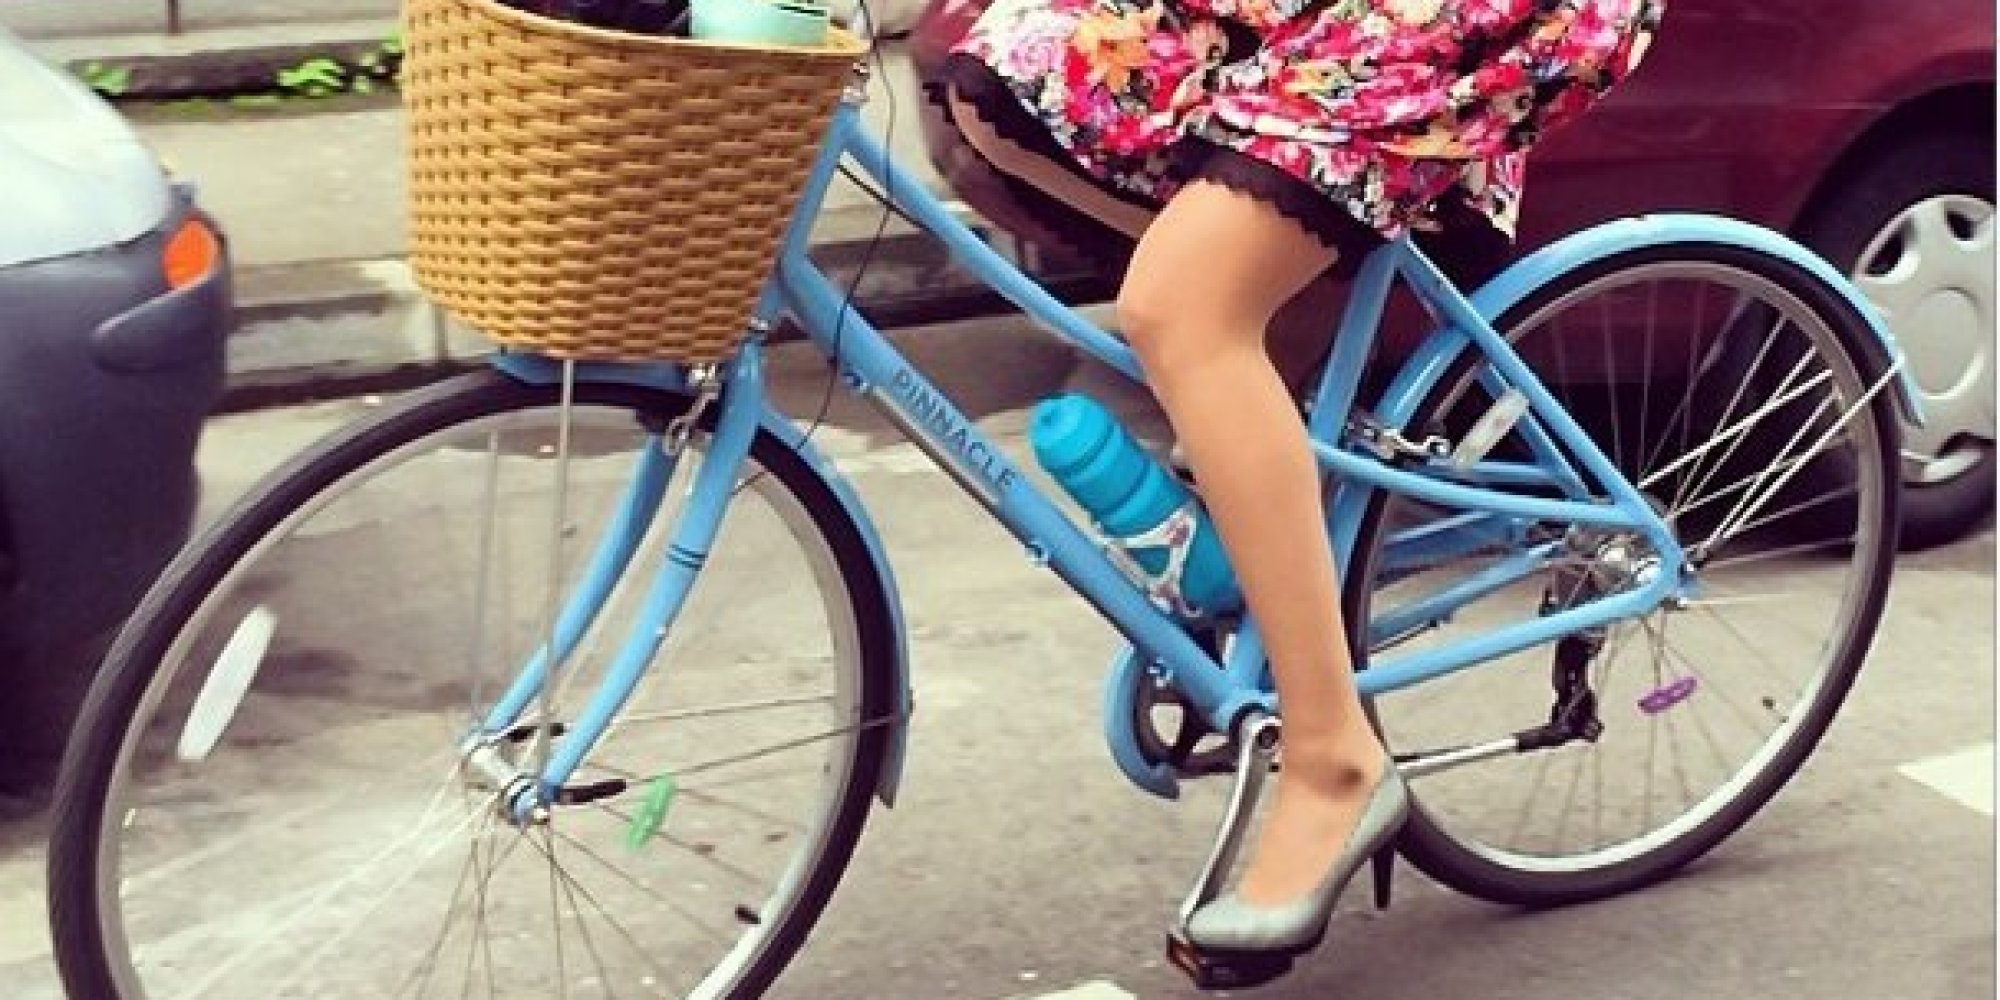 How To Look Like A Lady While Riding A Bike